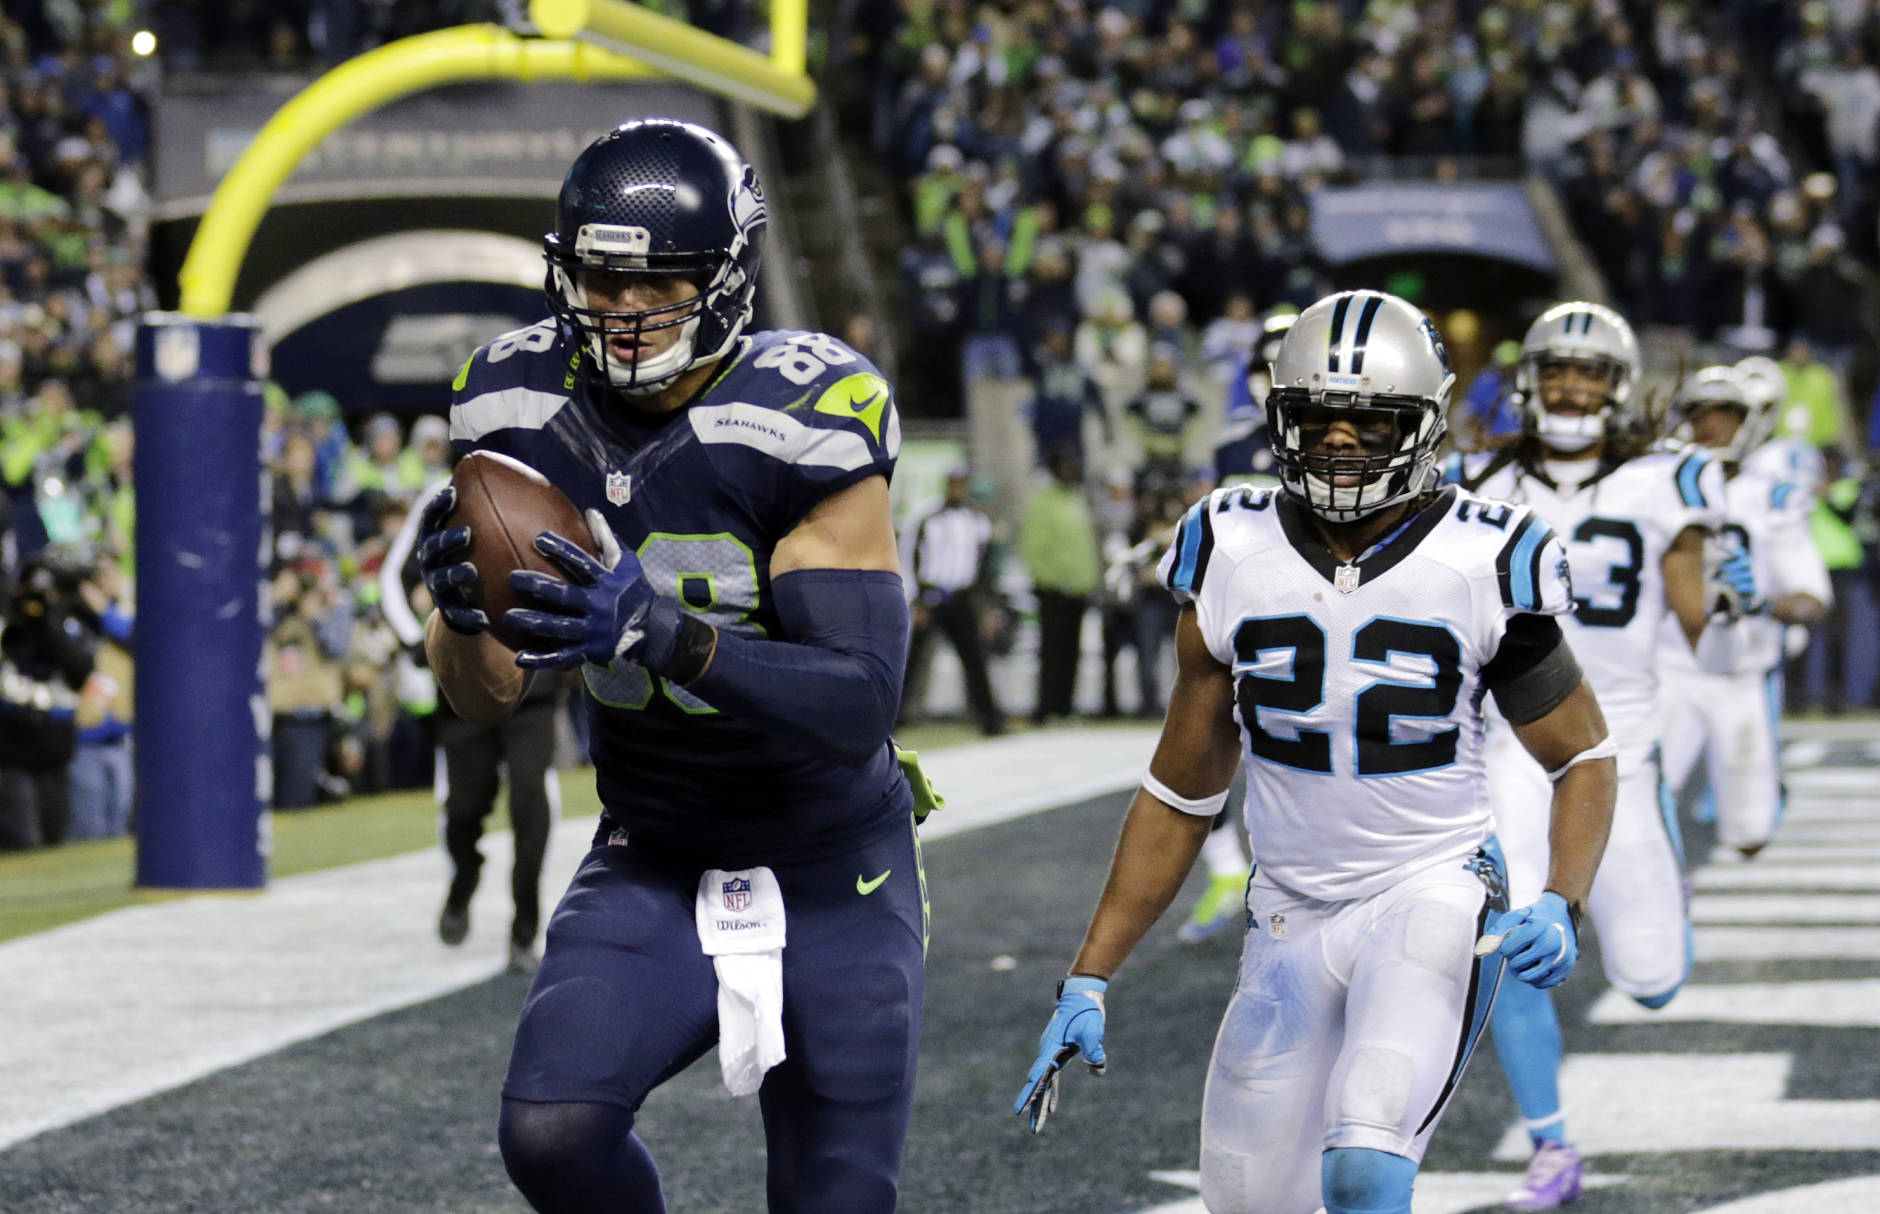 Seattle Seahawks' Jimmy Graham, left, runs for a touchdown after a reception in front of Carolina Panthers' Michael Griffin (22) in the second half of an NFL football game, Sunday, Dec. 4, 2016, in Seattle. (AP Photo/Stephen Brashear)d